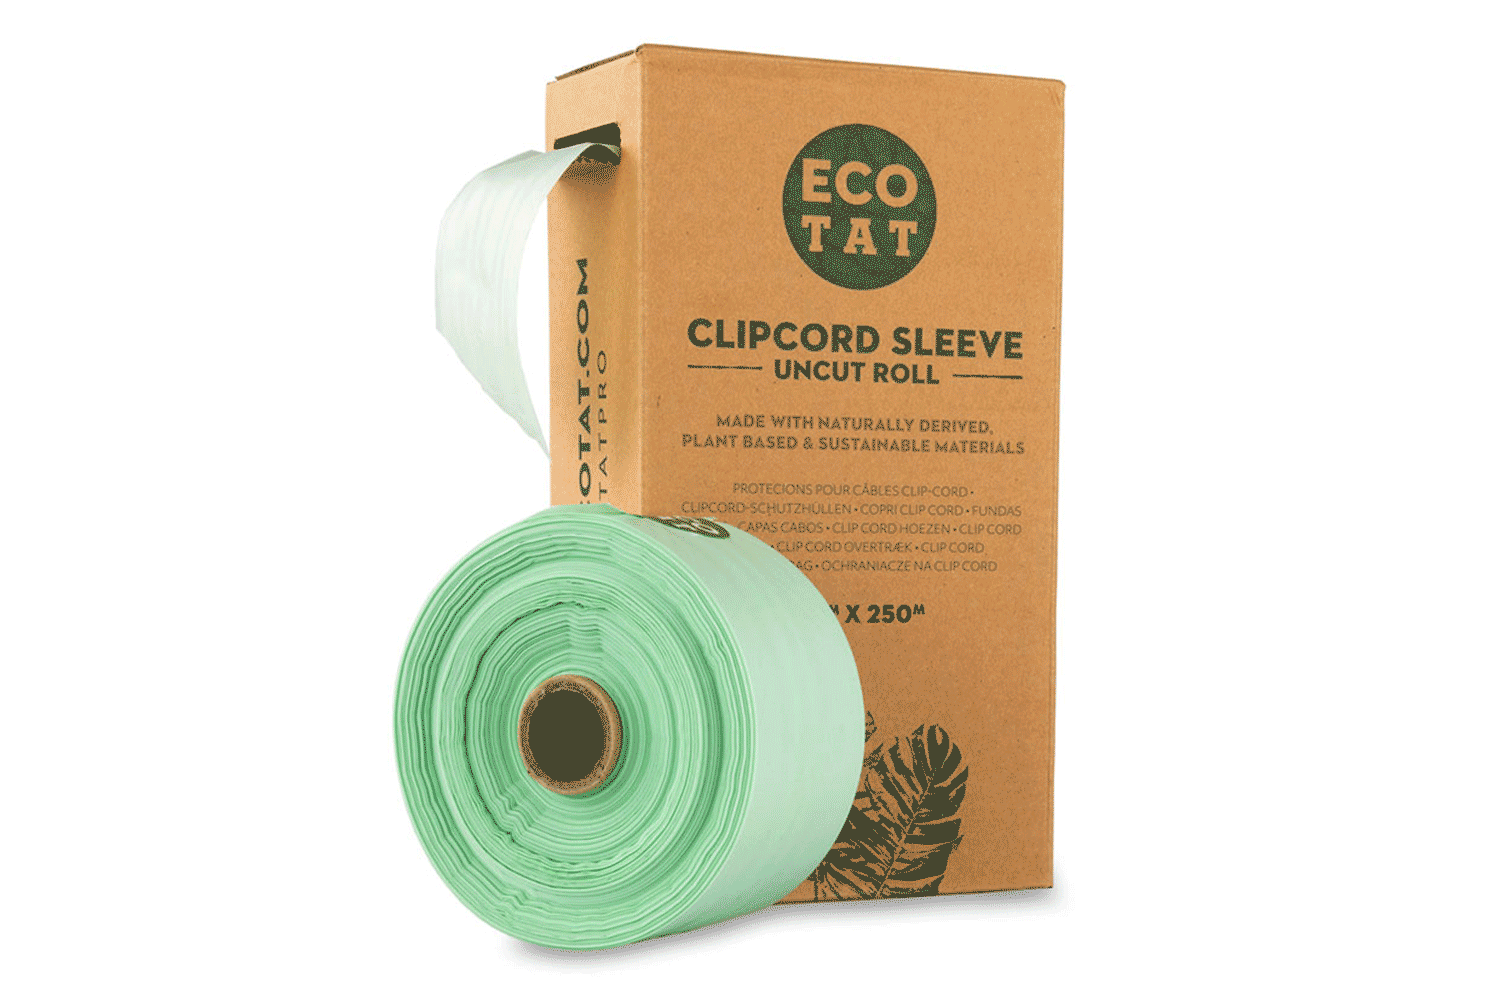 Eco friendly clipcord sleeve